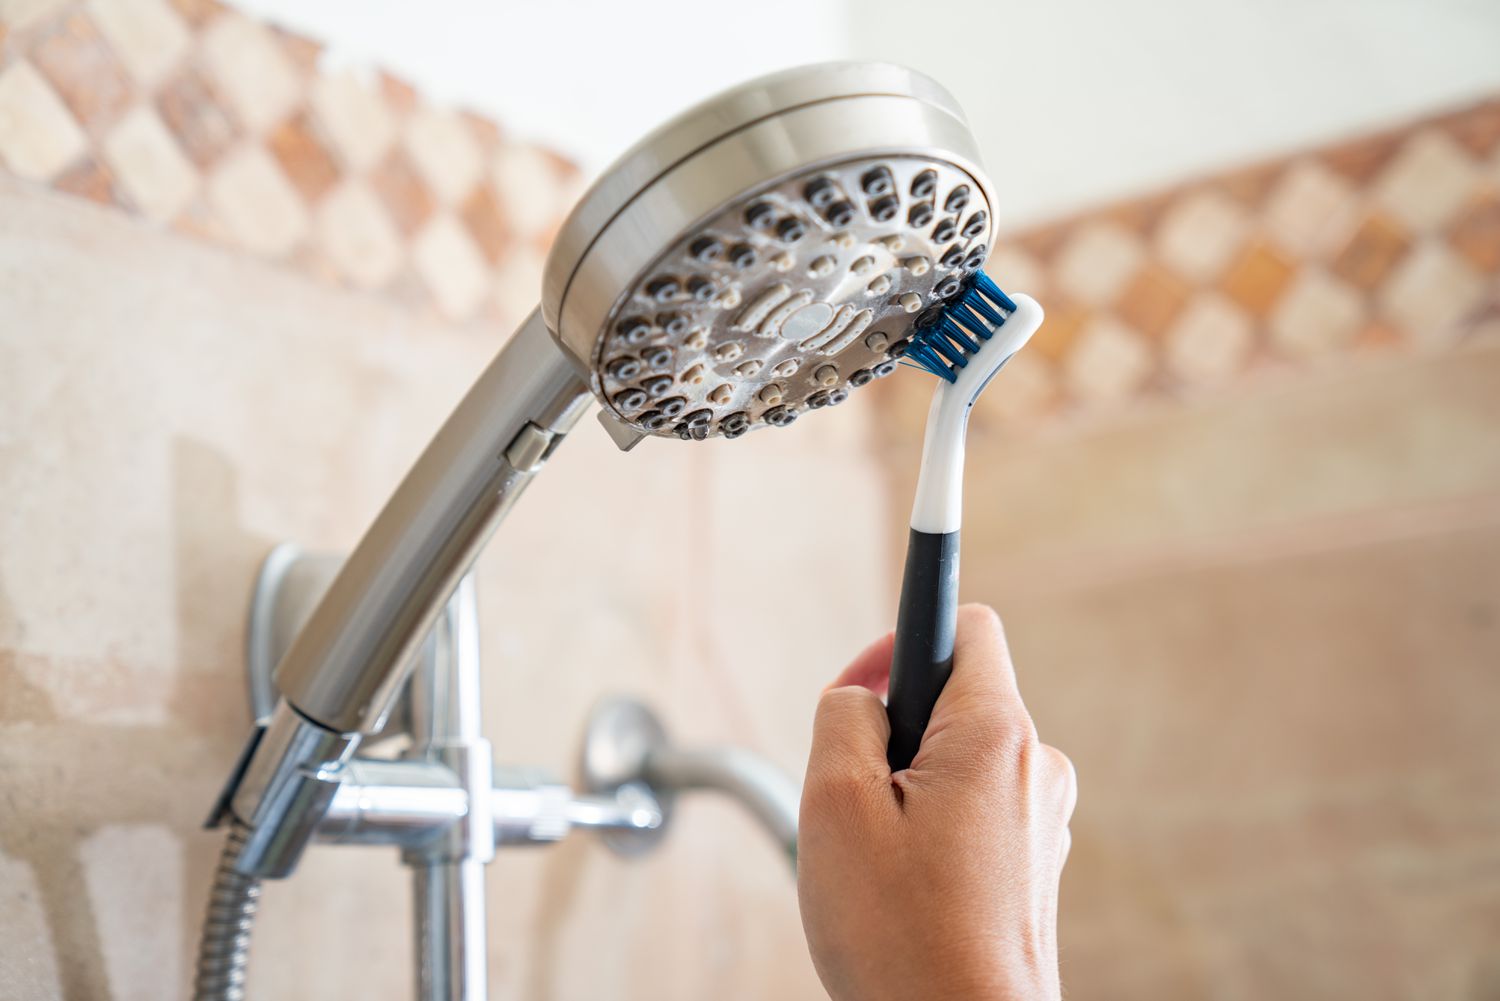 Shower head being scrubbed with old toothbrush to remove soap scrum